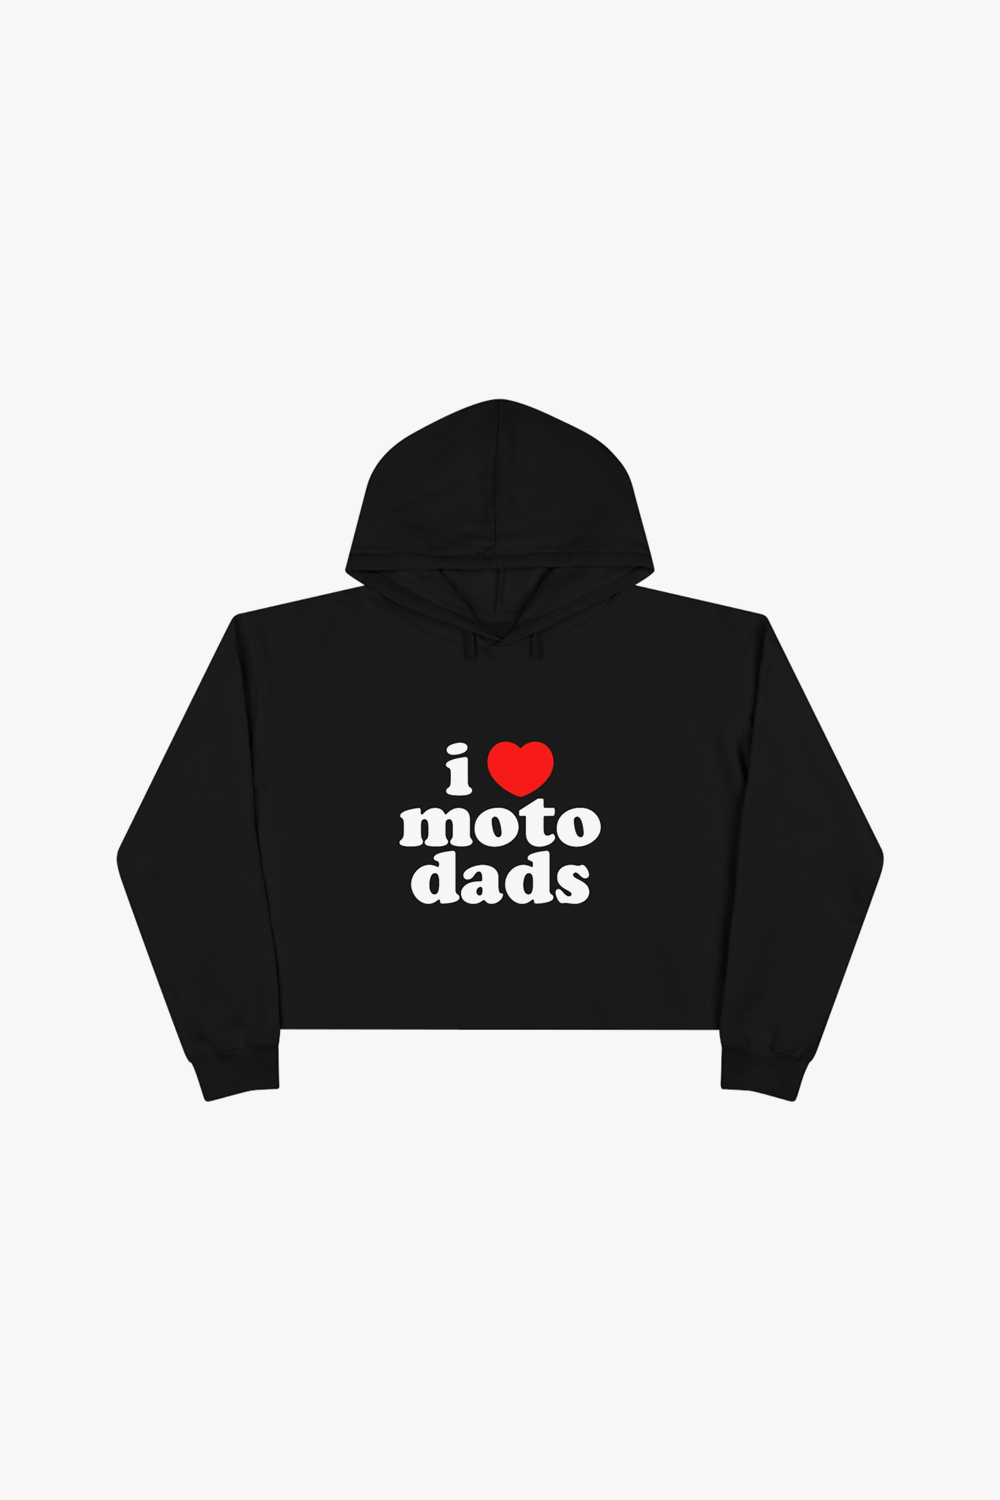 I Heart Moto Dads Cropped Hoodie